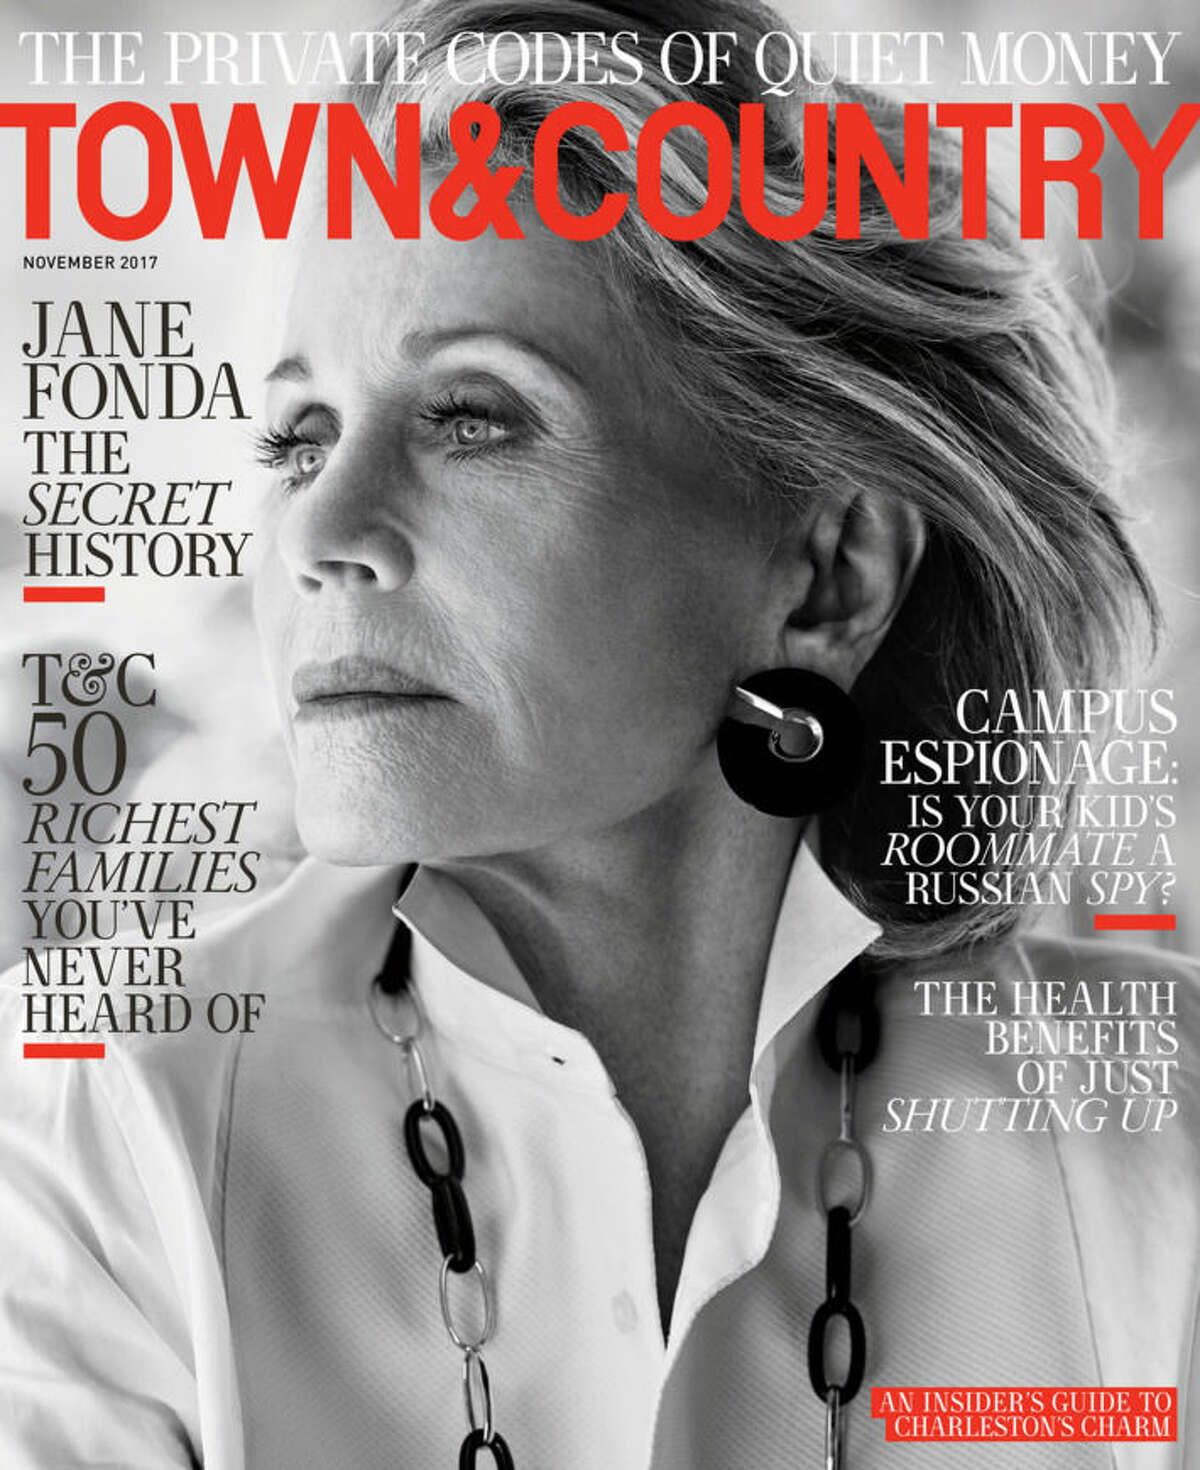 Jane Fonda on the cover of Town & Country magazine for November 2017.